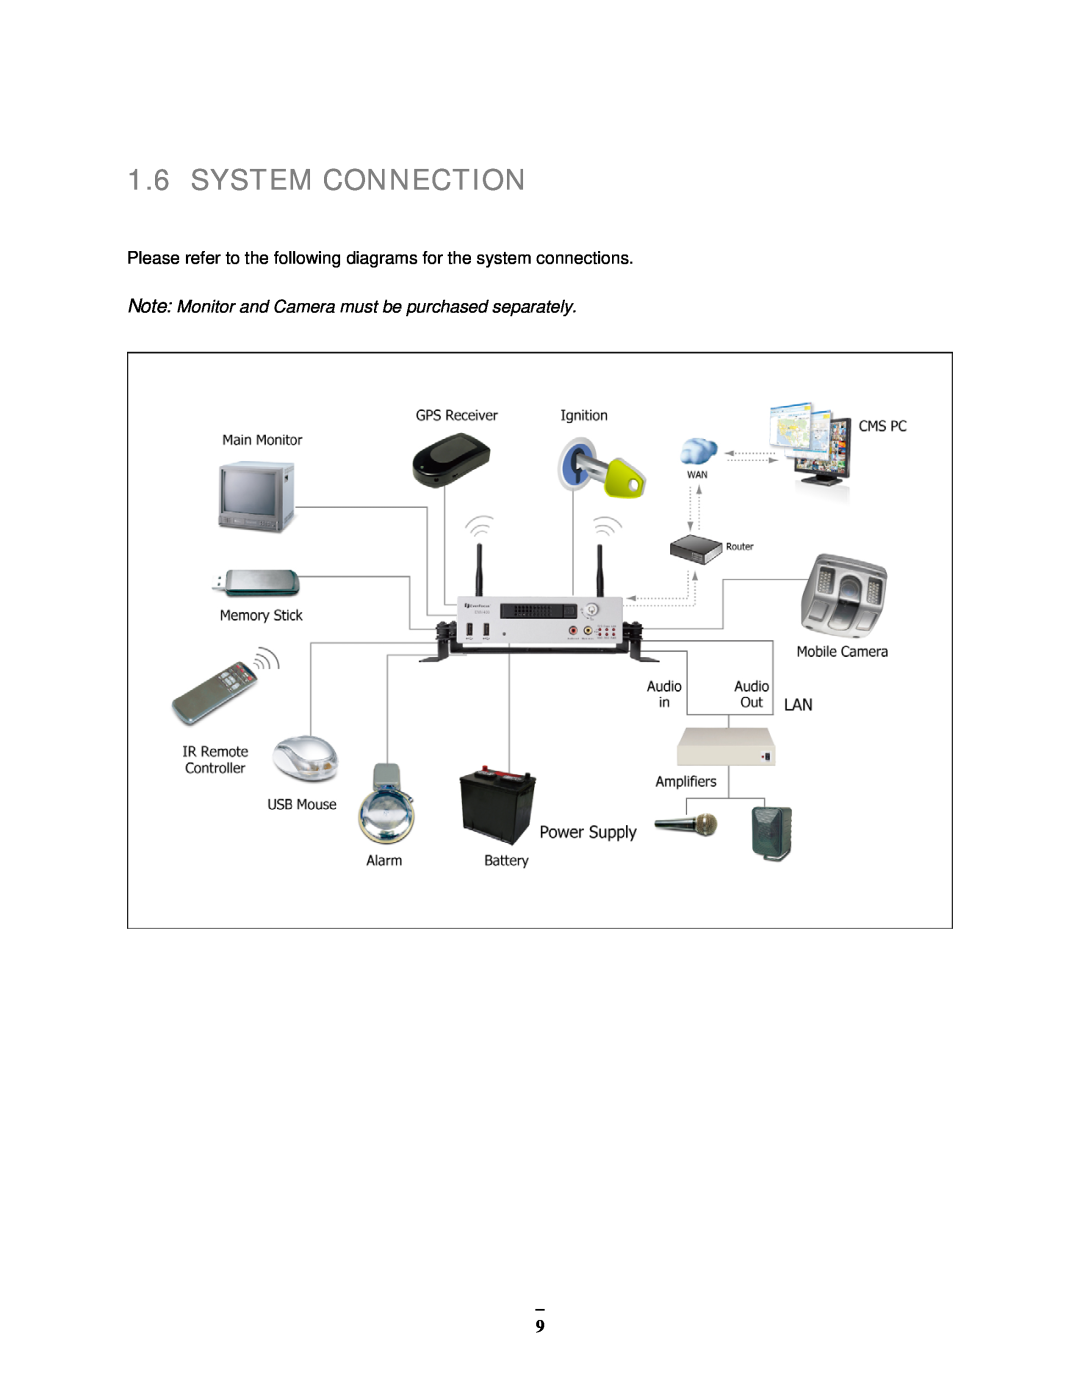 EverFocus EMV400 user manual System Connection, Please refer to the following diagrams for the system connections 